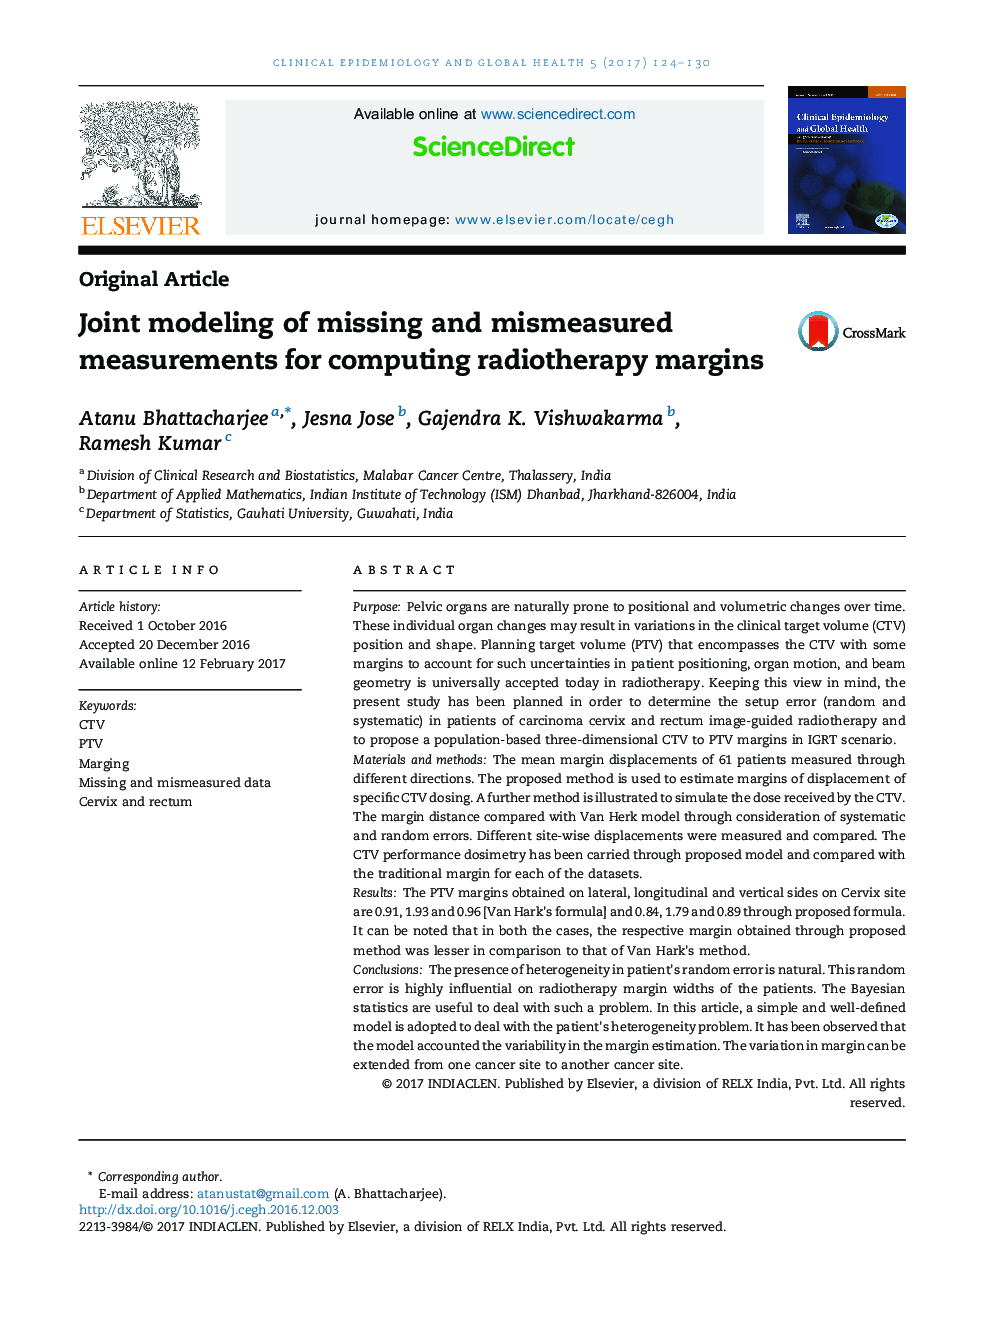 Joint modeling of missing and mismeasured measurements for computing radiotherapy margins